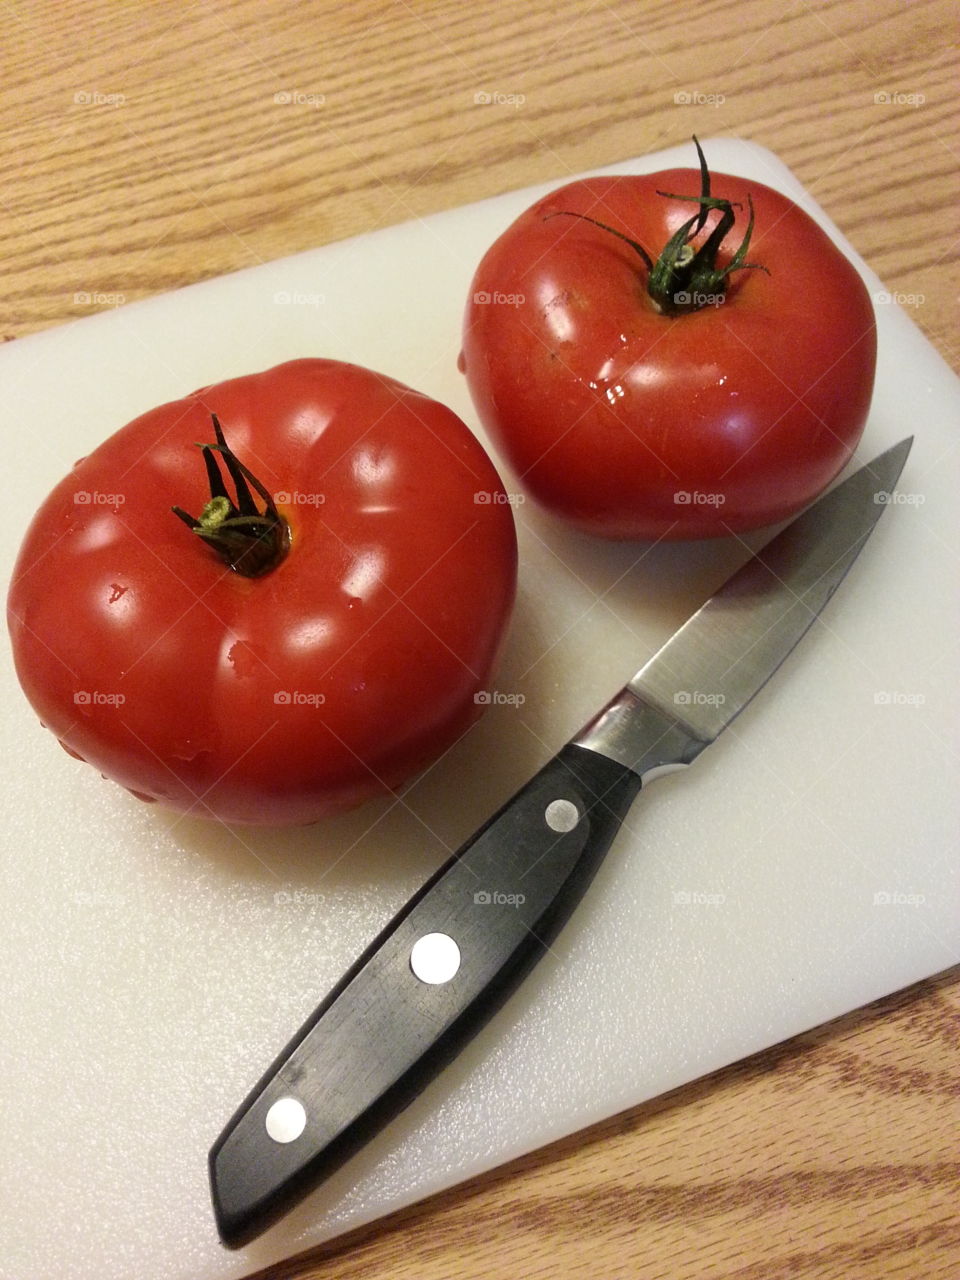 Awesome summer tomatoes